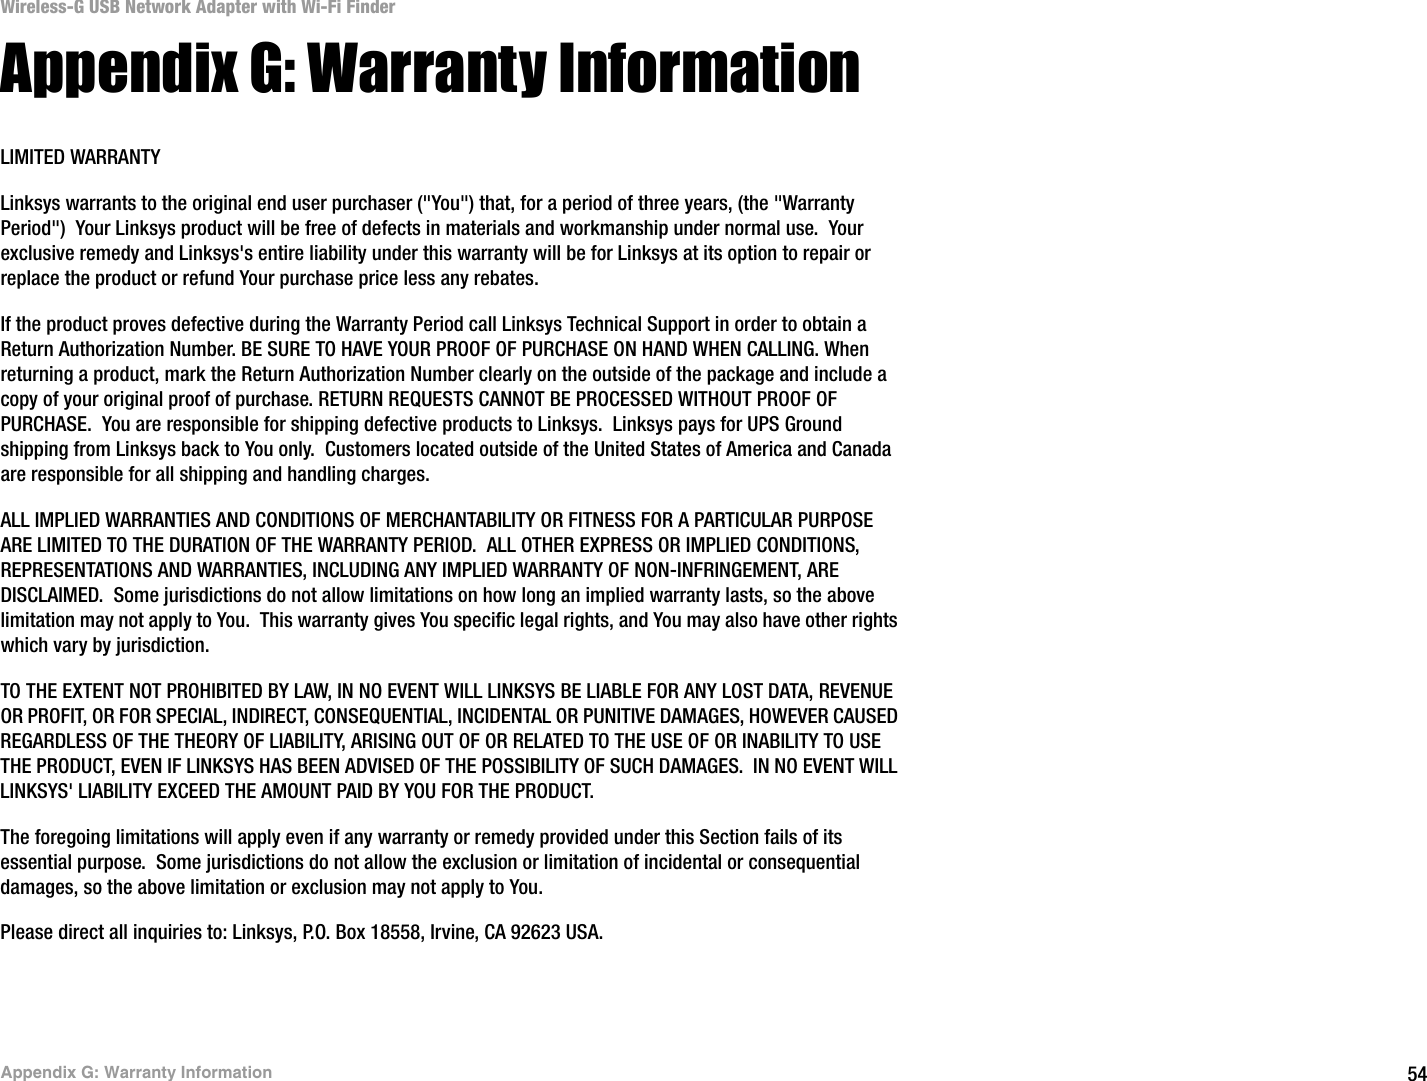 54Appendix G: Warranty InformationWireless-G USB Network Adapter with Wi-Fi FinderAppendix G: Warranty InformationLIMITED WARRANTYLinksys warrants to the original end user purchaser (&quot;You&quot;) that, for a period of three years, (the &quot;Warranty Period&quot;)  Your Linksys product will be free of defects in materials and workmanship under normal use.  Your exclusive remedy and Linksys&apos;s entire liability under this warranty will be for Linksys at its option to repair or replace the product or refund Your purchase price less any rebates.If the product proves defective during the Warranty Period call Linksys Technical Support in order to obtain a Return Authorization Number. BE SURE TO HAVE YOUR PROOF OF PURCHASE ON HAND WHEN CALLING. When returning a product, mark the Return Authorization Number clearly on the outside of the package and include a copy of your original proof of purchase. RETURN REQUESTS CANNOT BE PROCESSED WITHOUT PROOF OF PURCHASE.  You are responsible for shipping defective products to Linksys.  Linksys pays for UPS Ground shipping from Linksys back to You only.  Customers located outside of the United States of America and Canada are responsible for all shipping and handling charges. ALL IMPLIED WARRANTIES AND CONDITIONS OF MERCHANTABILITY OR FITNESS FOR A PARTICULAR PURPOSE ARE LIMITED TO THE DURATION OF THE WARRANTY PERIOD.  ALL OTHER EXPRESS OR IMPLIED CONDITIONS, REPRESENTATIONS AND WARRANTIES, INCLUDING ANY IMPLIED WARRANTY OF NON-INFRINGEMENT, ARE DISCLAIMED.  Some jurisdictions do not allow limitations on how long an implied warranty lasts, so the above limitation may not apply to You.  This warranty gives You specific legal rights, and You may also have other rights which vary by jurisdiction.TO THE EXTENT NOT PROHIBITED BY LAW, IN NO EVENT WILL LINKSYS BE LIABLE FOR ANY LOST DATA, REVENUE OR PROFIT, OR FOR SPECIAL, INDIRECT, CONSEQUENTIAL, INCIDENTAL OR PUNITIVE DAMAGES, HOWEVER CAUSED REGARDLESS OF THE THEORY OF LIABILITY, ARISING OUT OF OR RELATED TO THE USE OF OR INABILITY TO USE THE PRODUCT, EVEN IF LINKSYS HAS BEEN ADVISED OF THE POSSIBILITY OF SUCH DAMAGES.  IN NO EVENT WILL LINKSYS&apos; LIABILITY EXCEED THE AMOUNT PAID BY YOU FOR THE PRODUCT.  The foregoing limitations will apply even if any warranty or remedy provided under this Section fails of its essential purpose.  Some jurisdictions do not allow the exclusion or limitation of incidental or consequential damages, so the above limitation or exclusion may not apply to You.Please direct all inquiries to: Linksys, P.O. Box 18558, Irvine, CA 92623 USA.